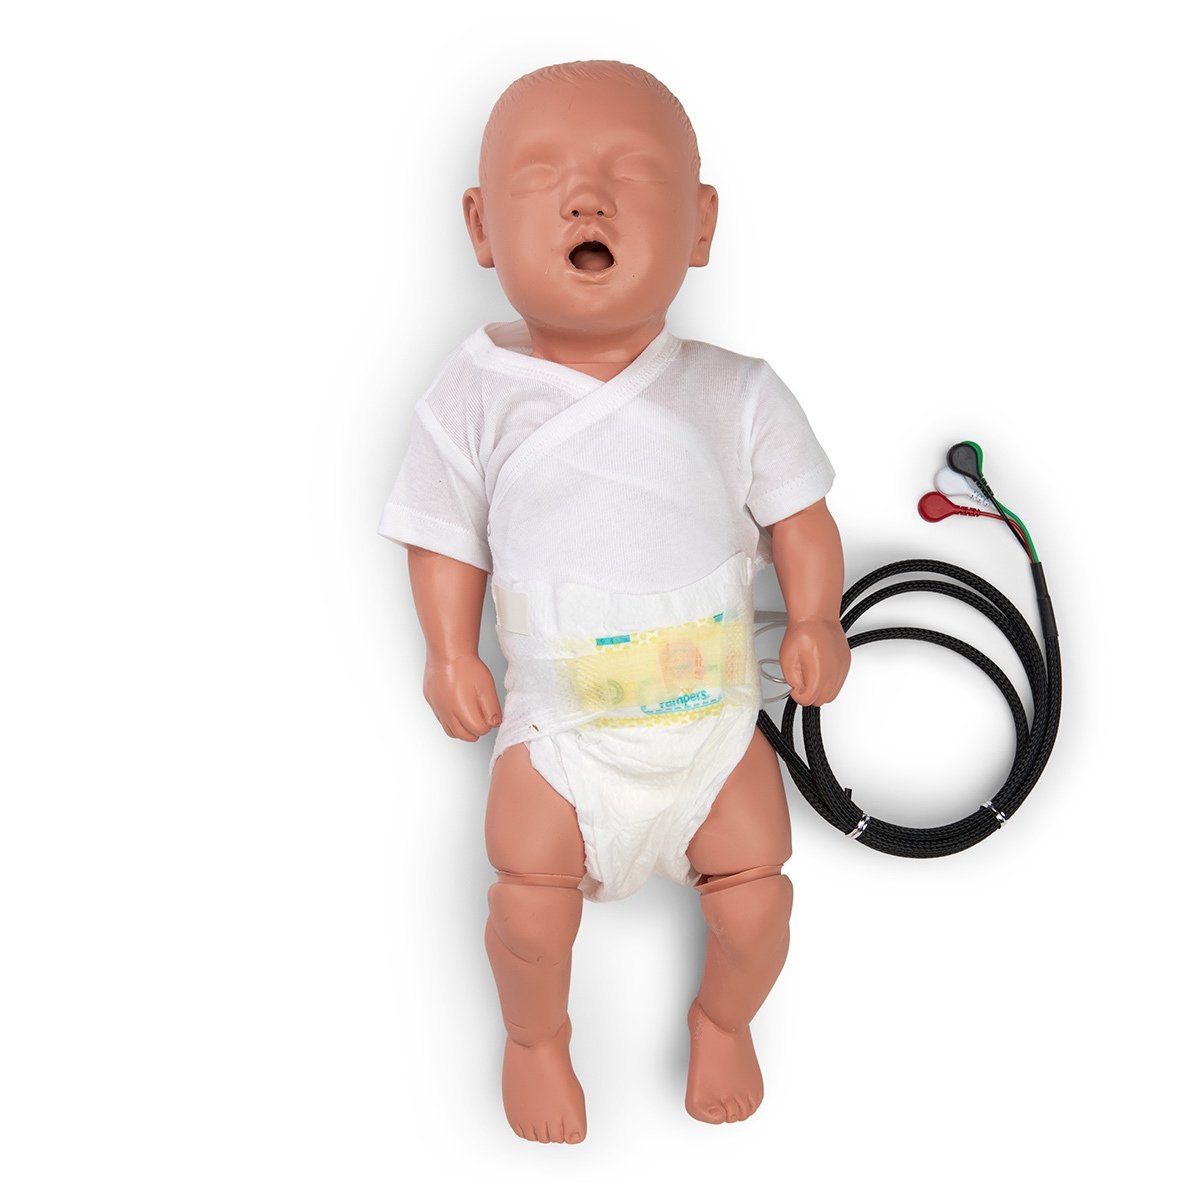 Simulaids Pediatric ALS Trainer Complete with Arrhythmia